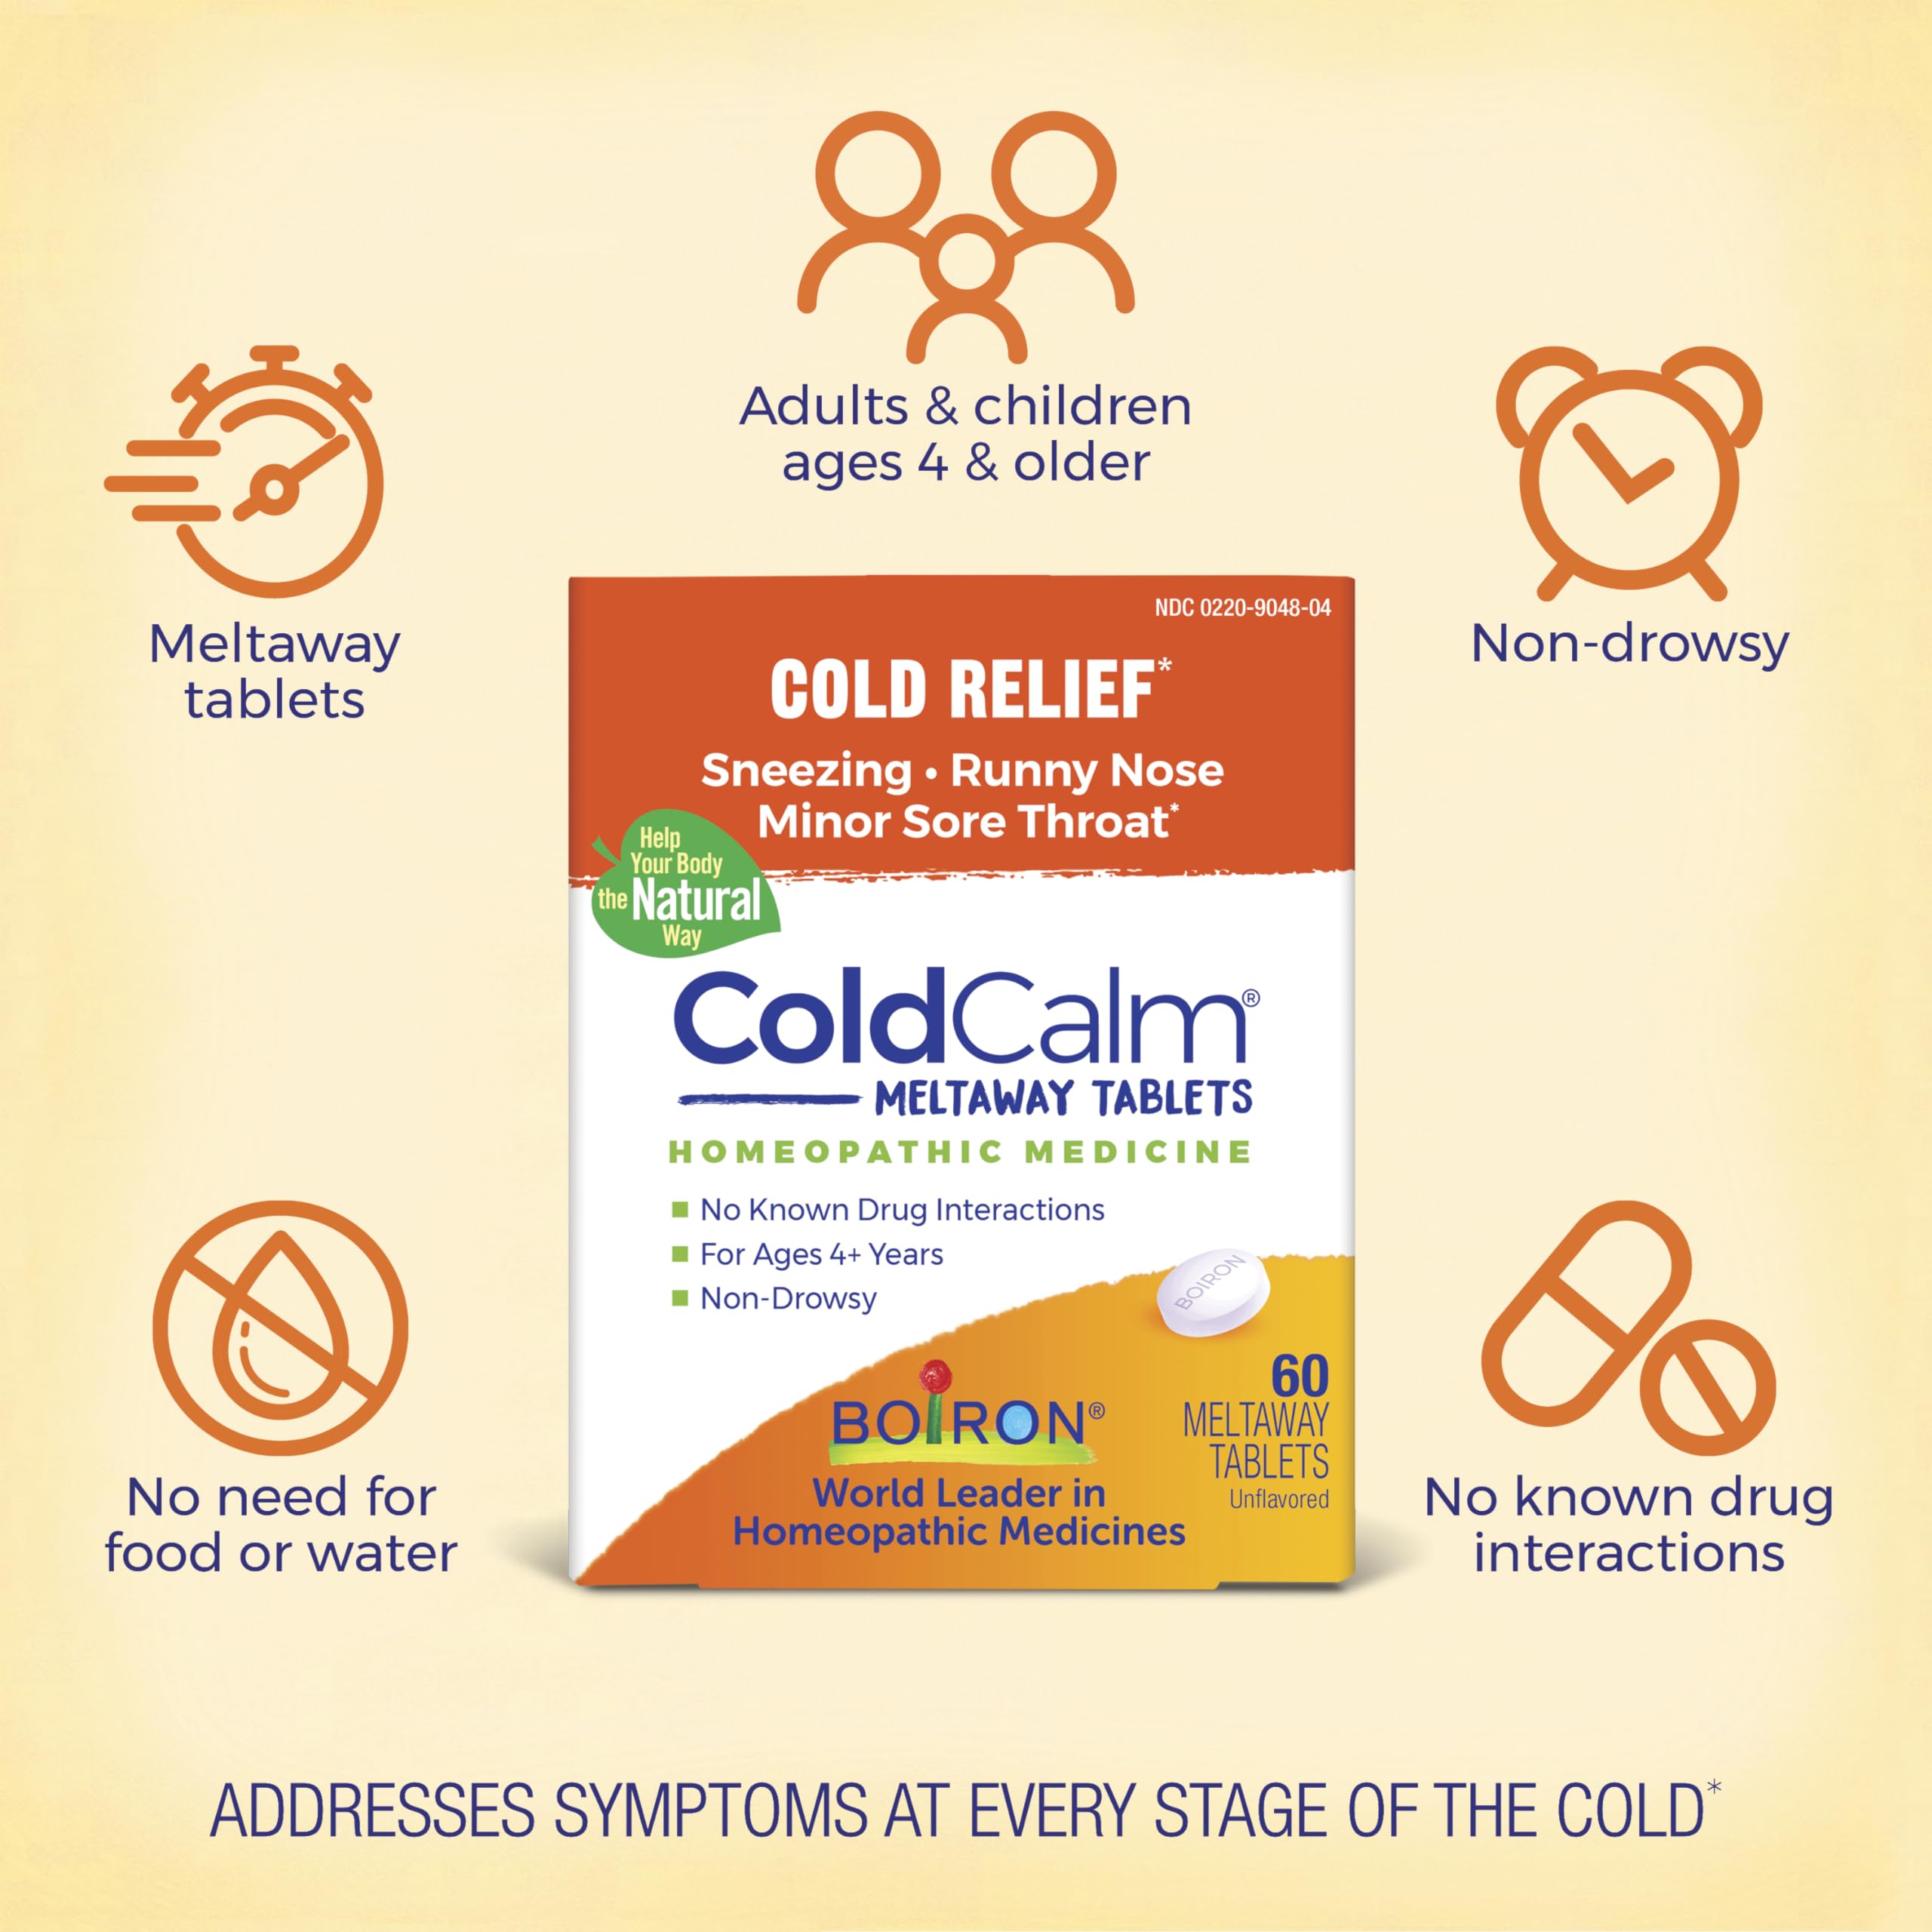 Boiron Oscillococcinum for Relief from Flu-Like Symptoms of Body Aches & ColdCalm Tablets for Relief of Common Cold Symptoms Such as Sneezing